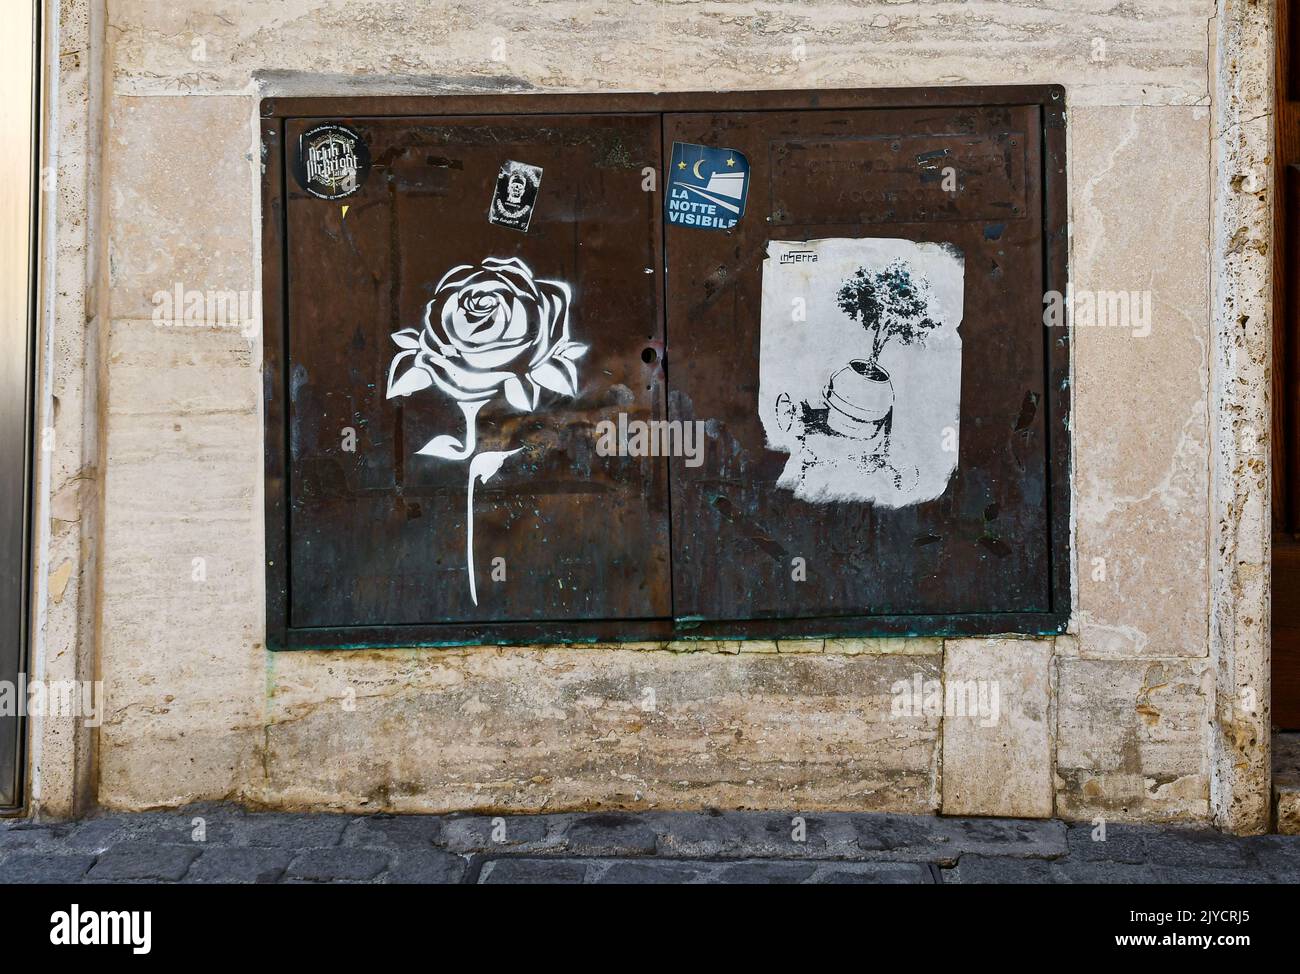 Close-up of a rusty gas meter with stencil and paste up street art works in the old town of Grosseto, Tuscany, Italy Stock Photo